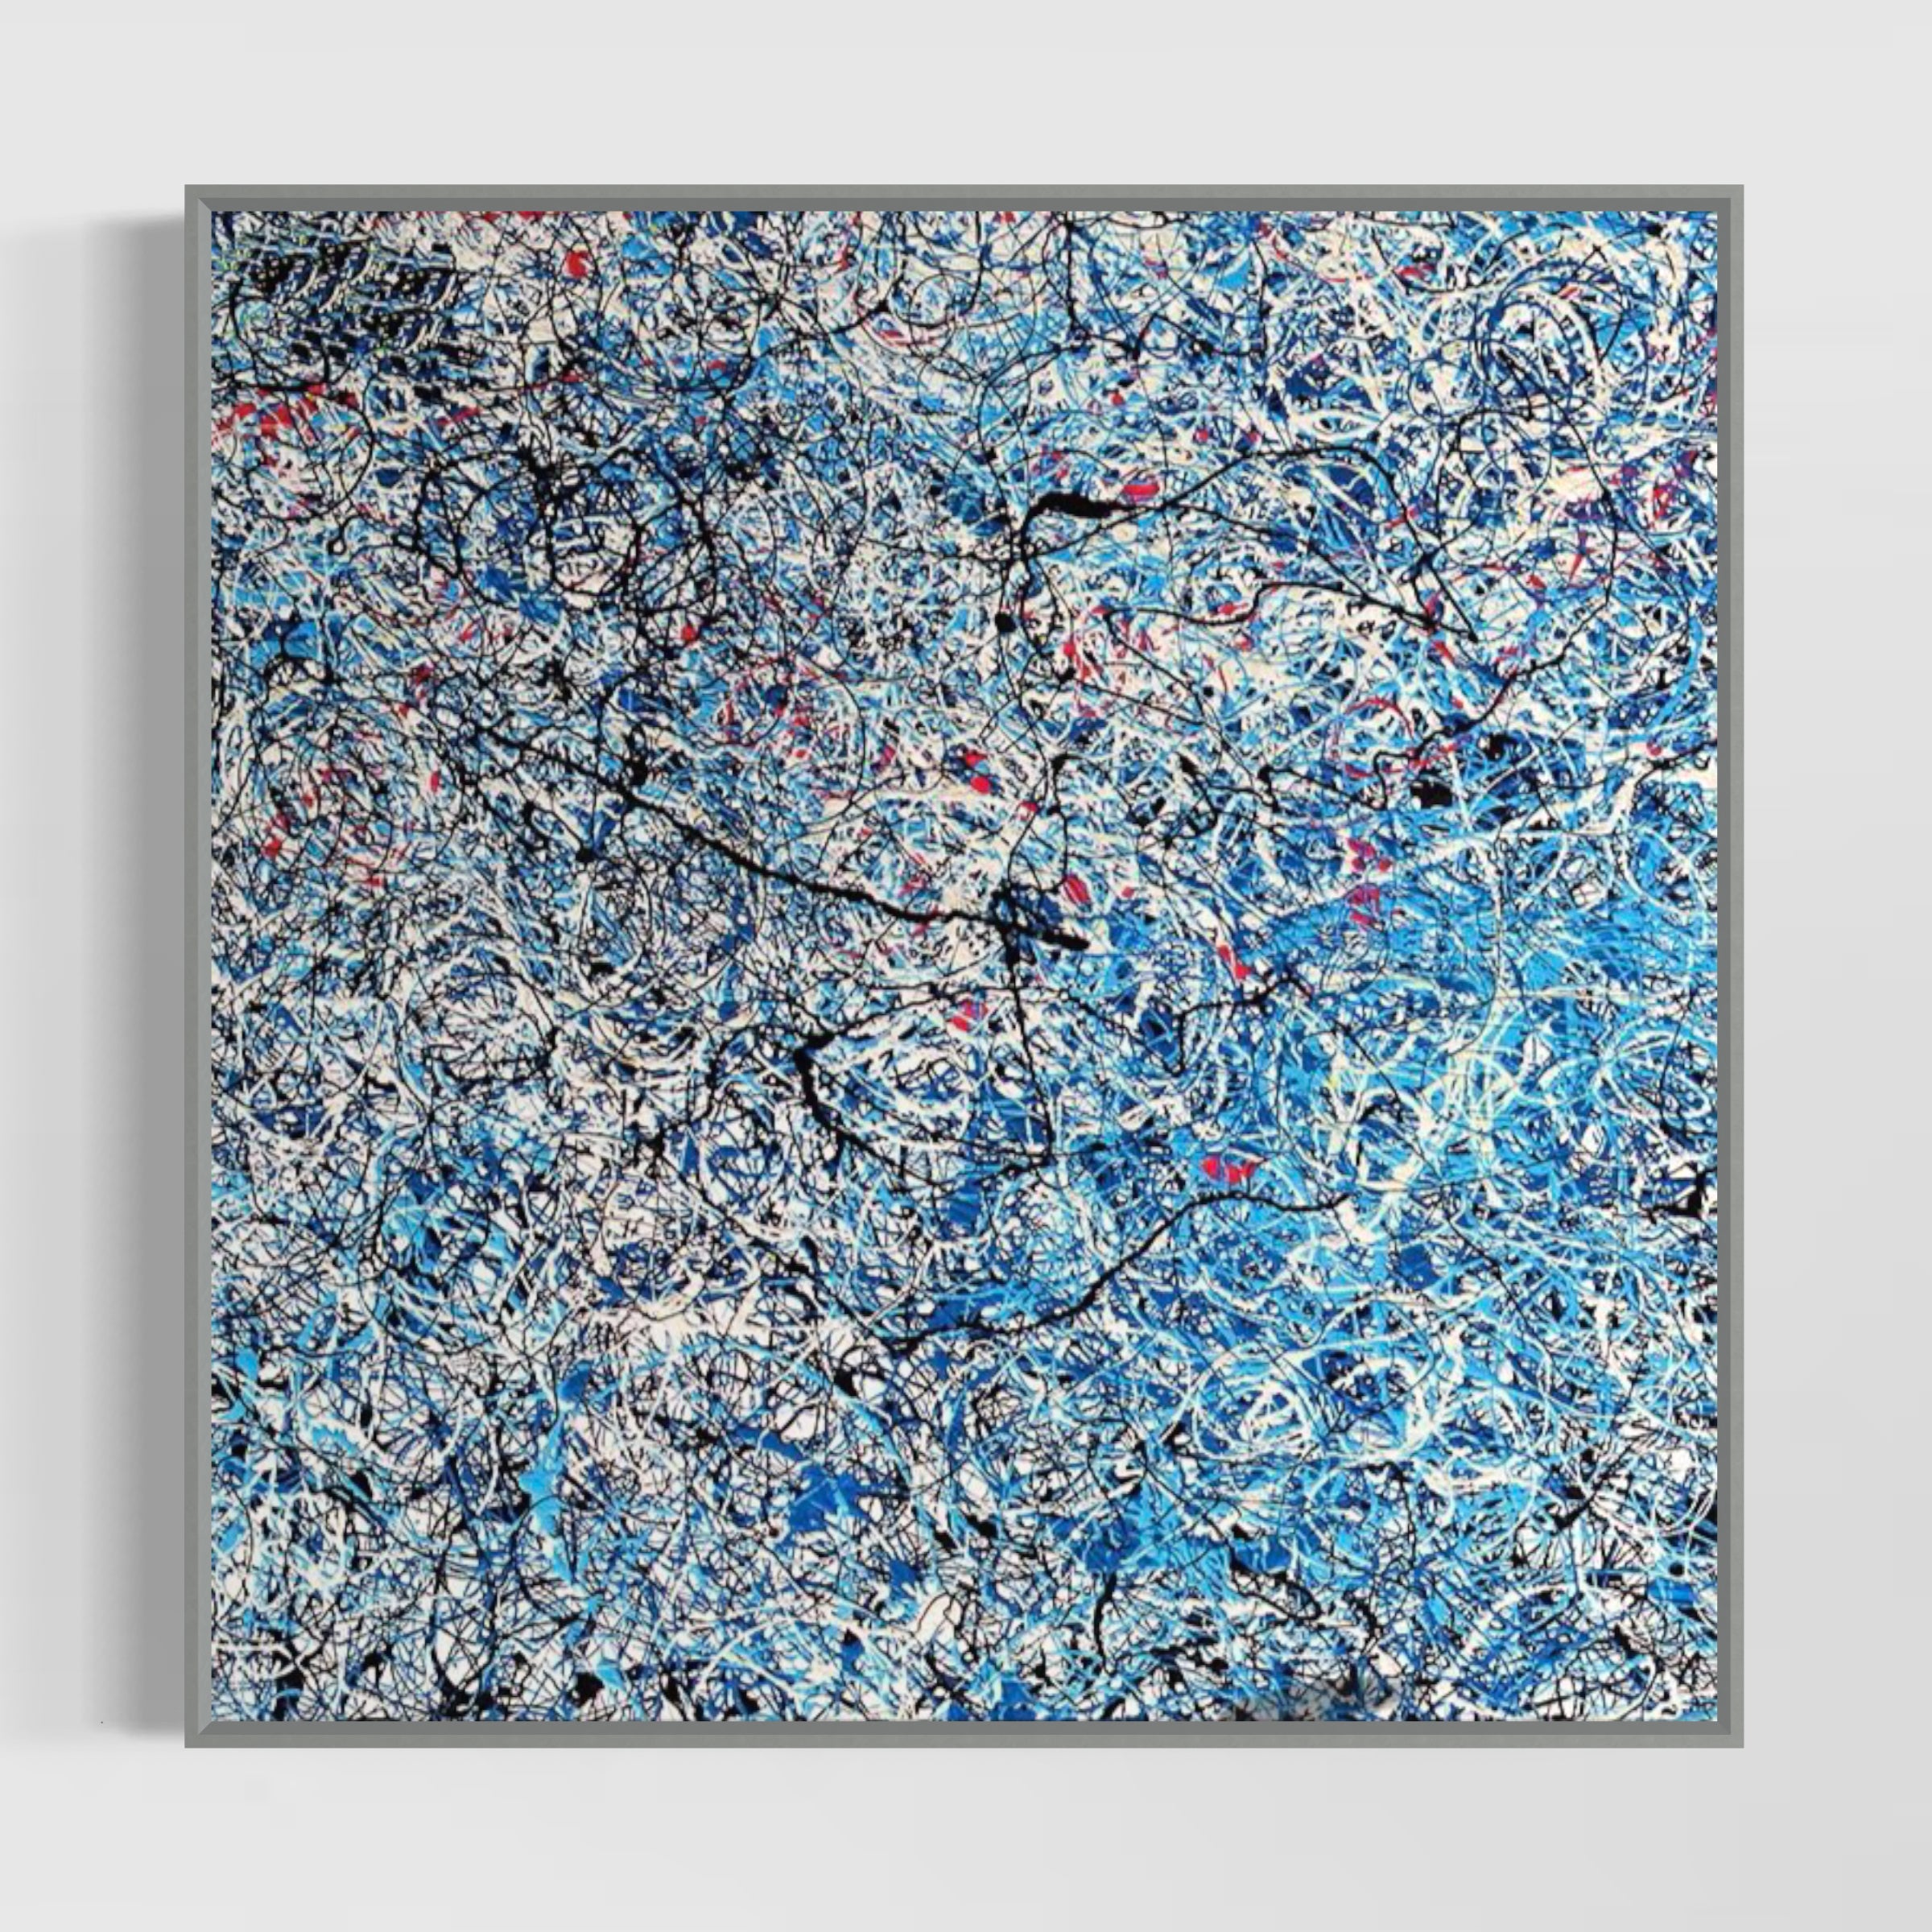 Gentle 1, Gallery Wrap (With Bleed) / 90x90cm